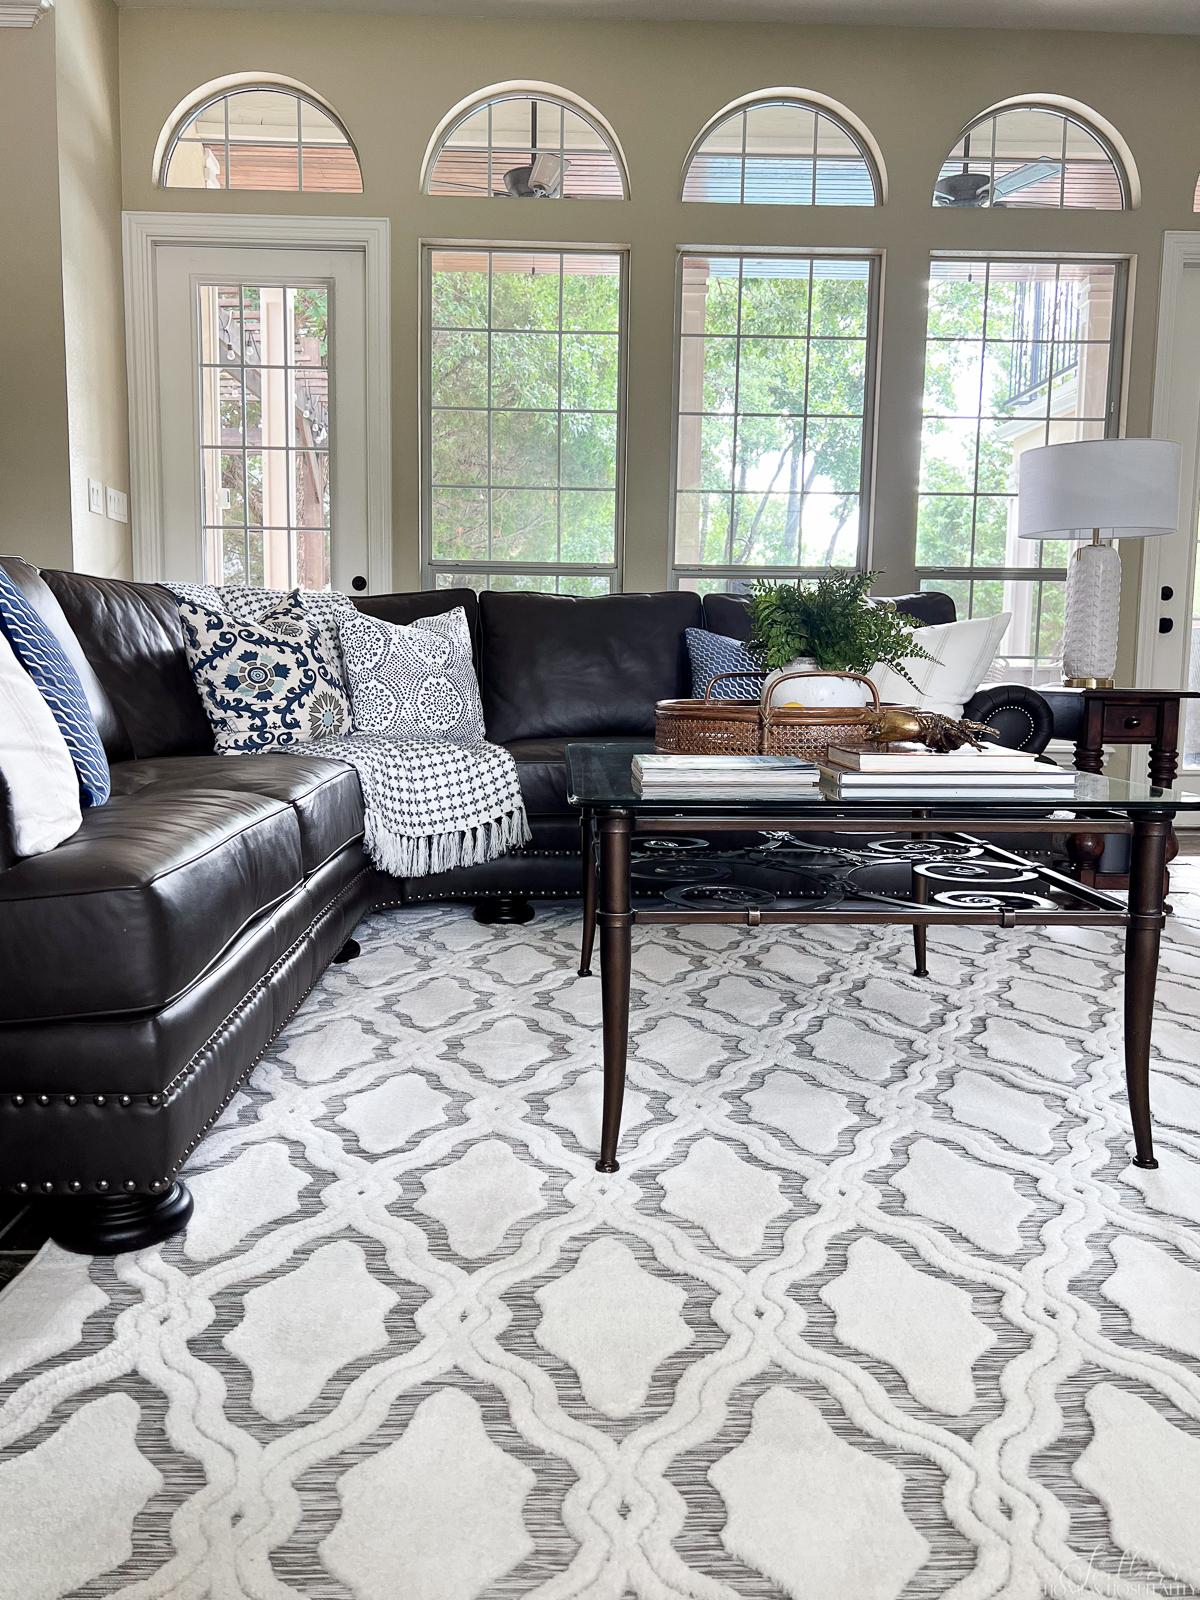 Area Rug Rules: Easy Guide to the Perfect Size and Placement (+Printable)